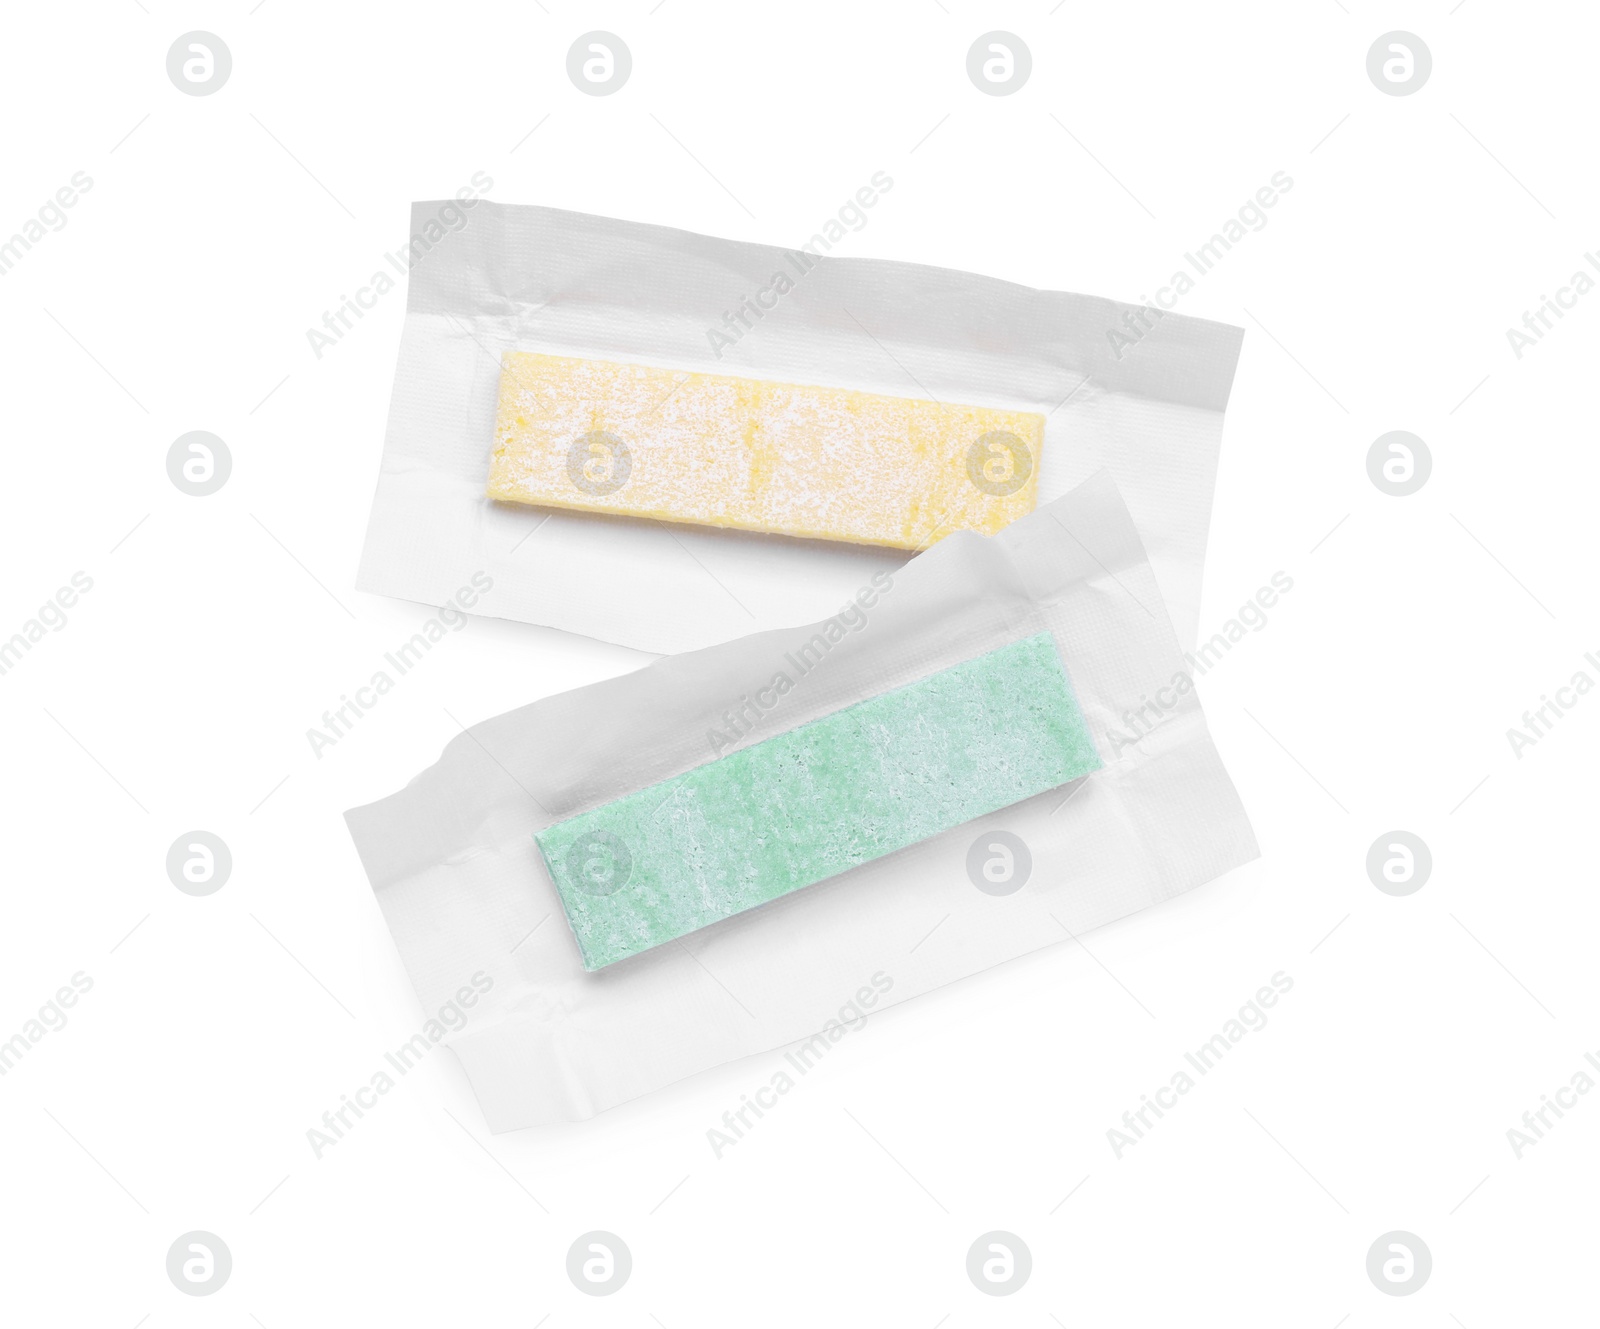 Photo of Unwrapped sticks of chewing gum on white background, top view